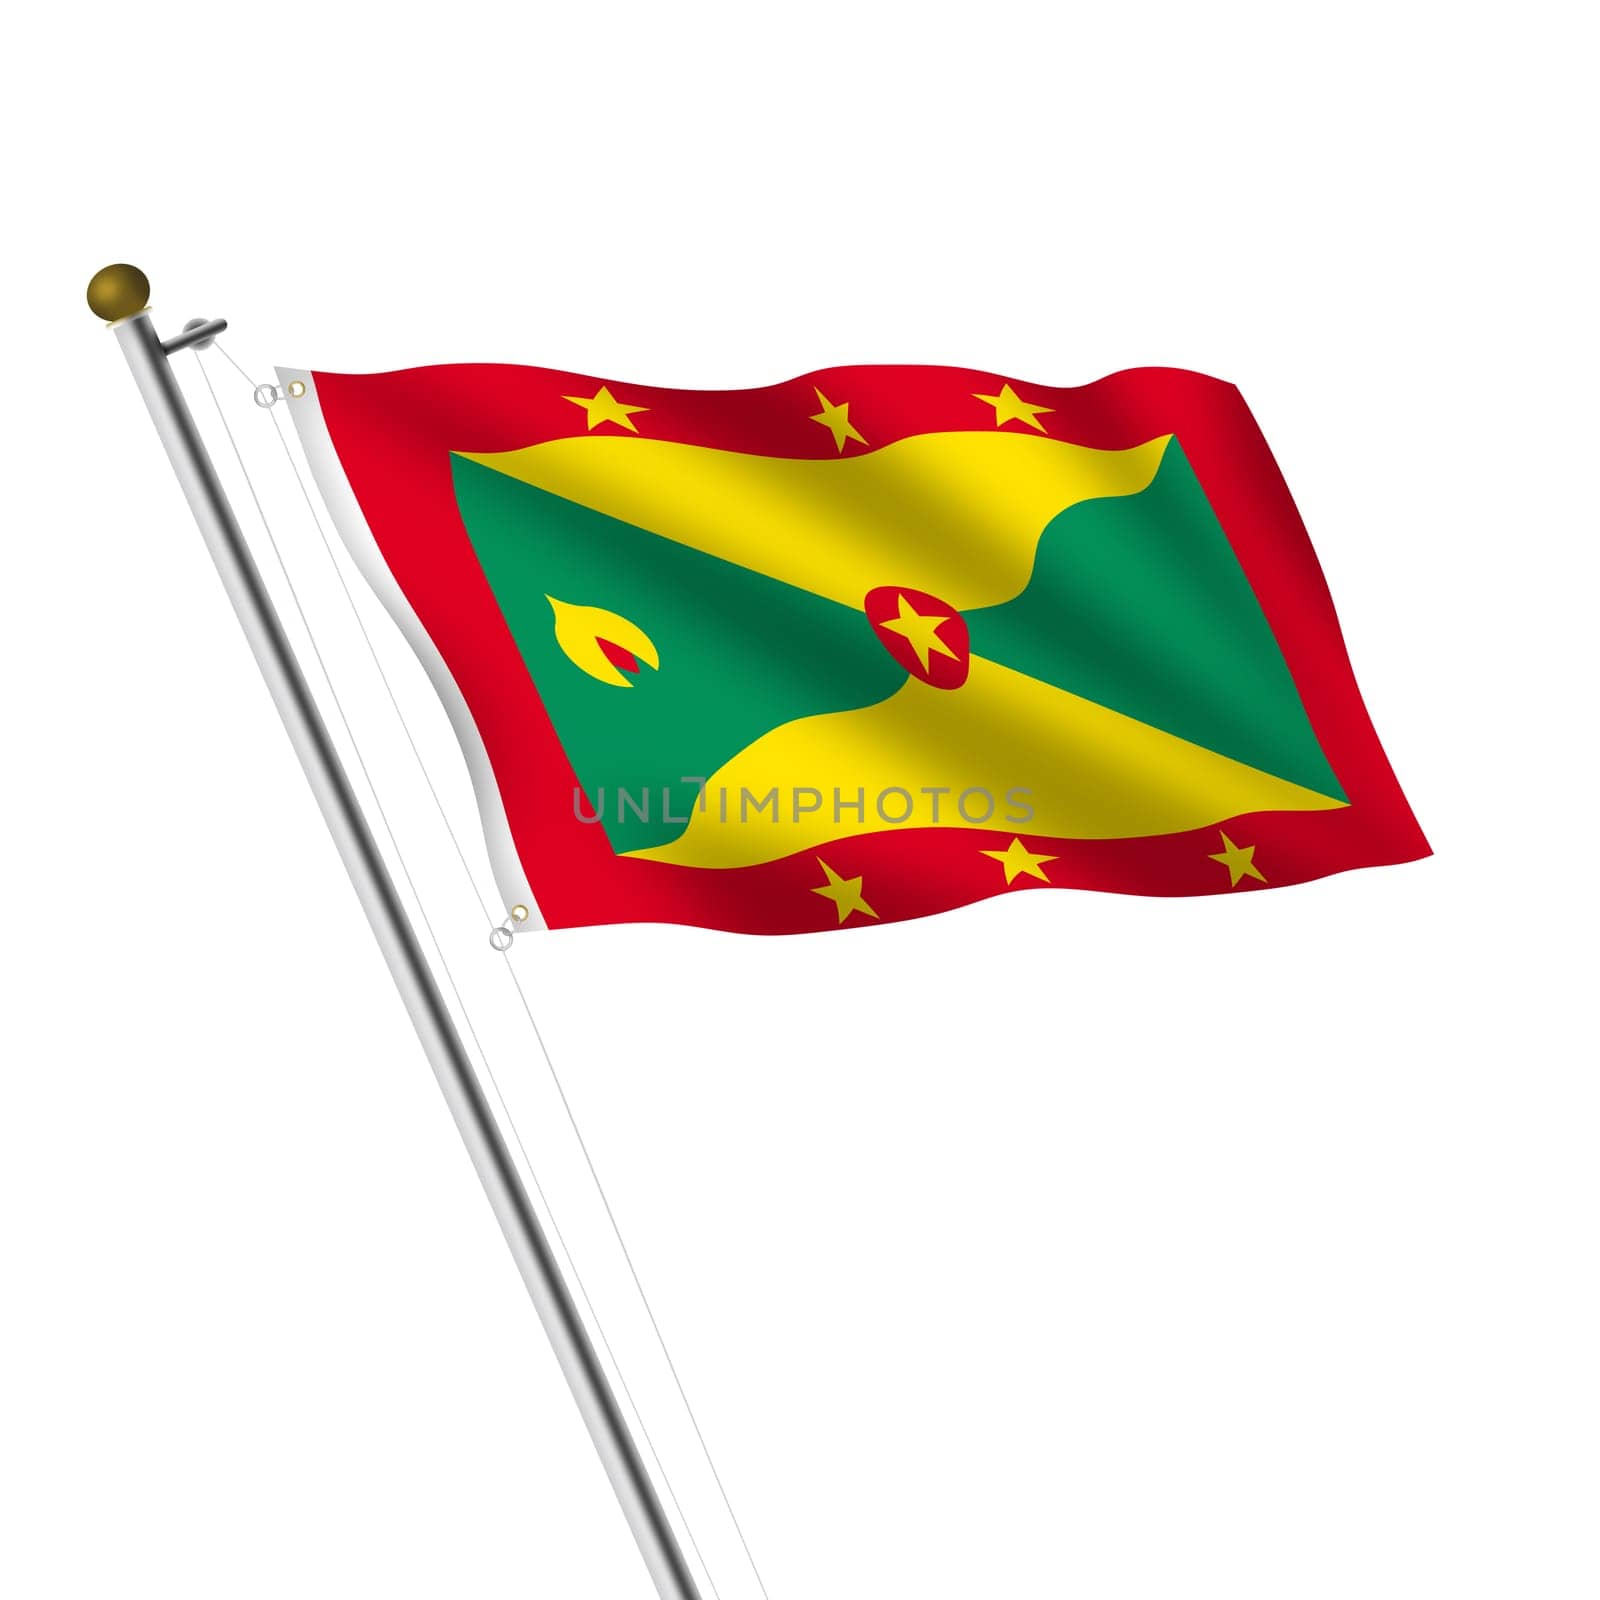 A Grenada Flagpole 3d illustration on white with clipping path